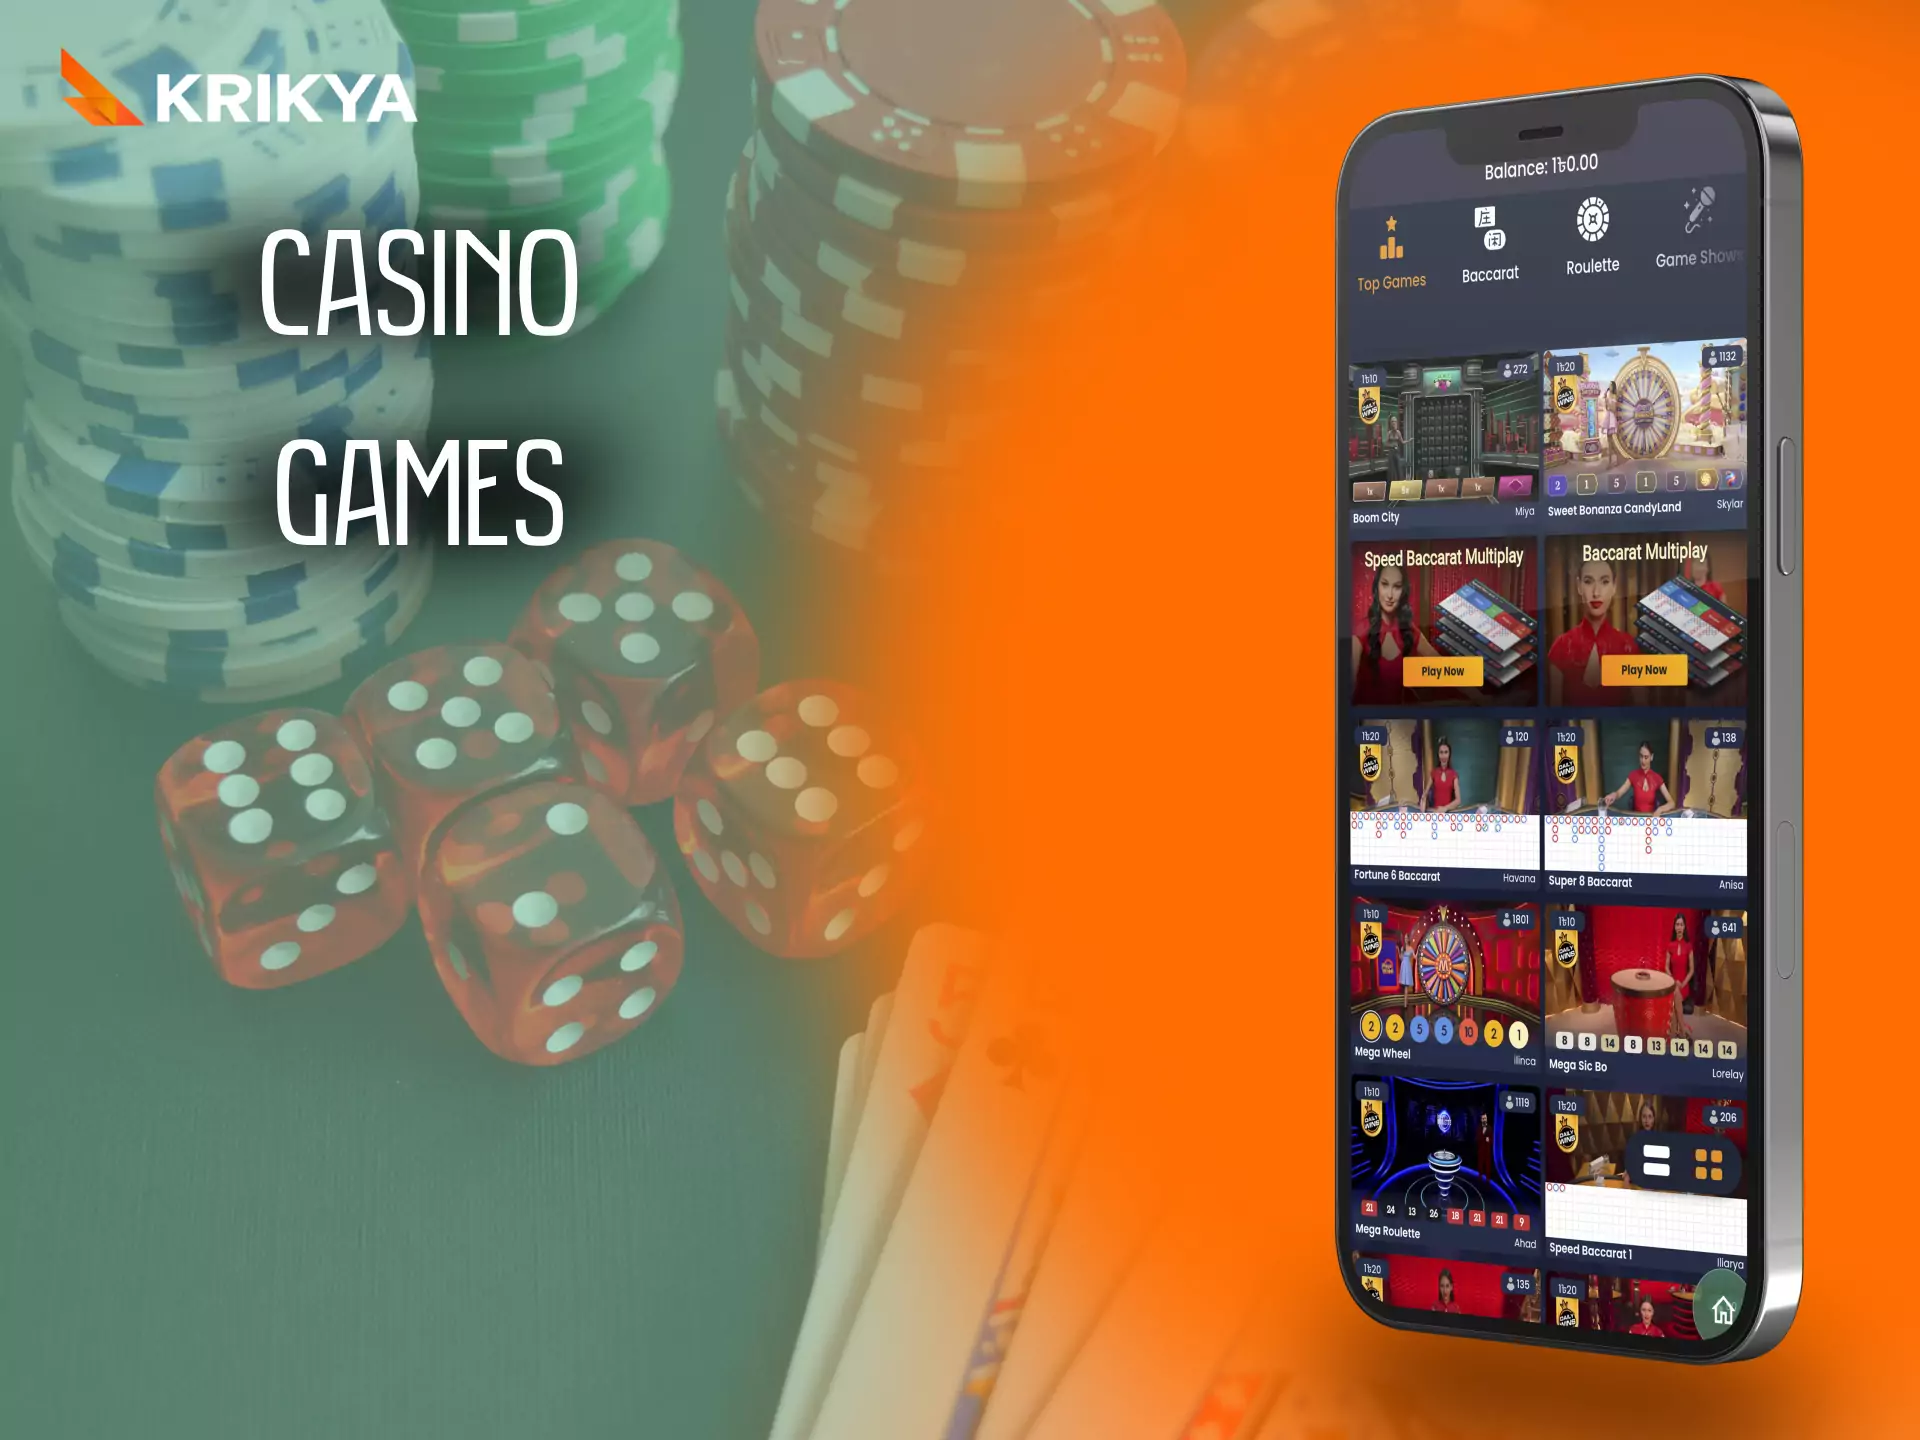 In Krikya Casino, play any games, find your favorite.